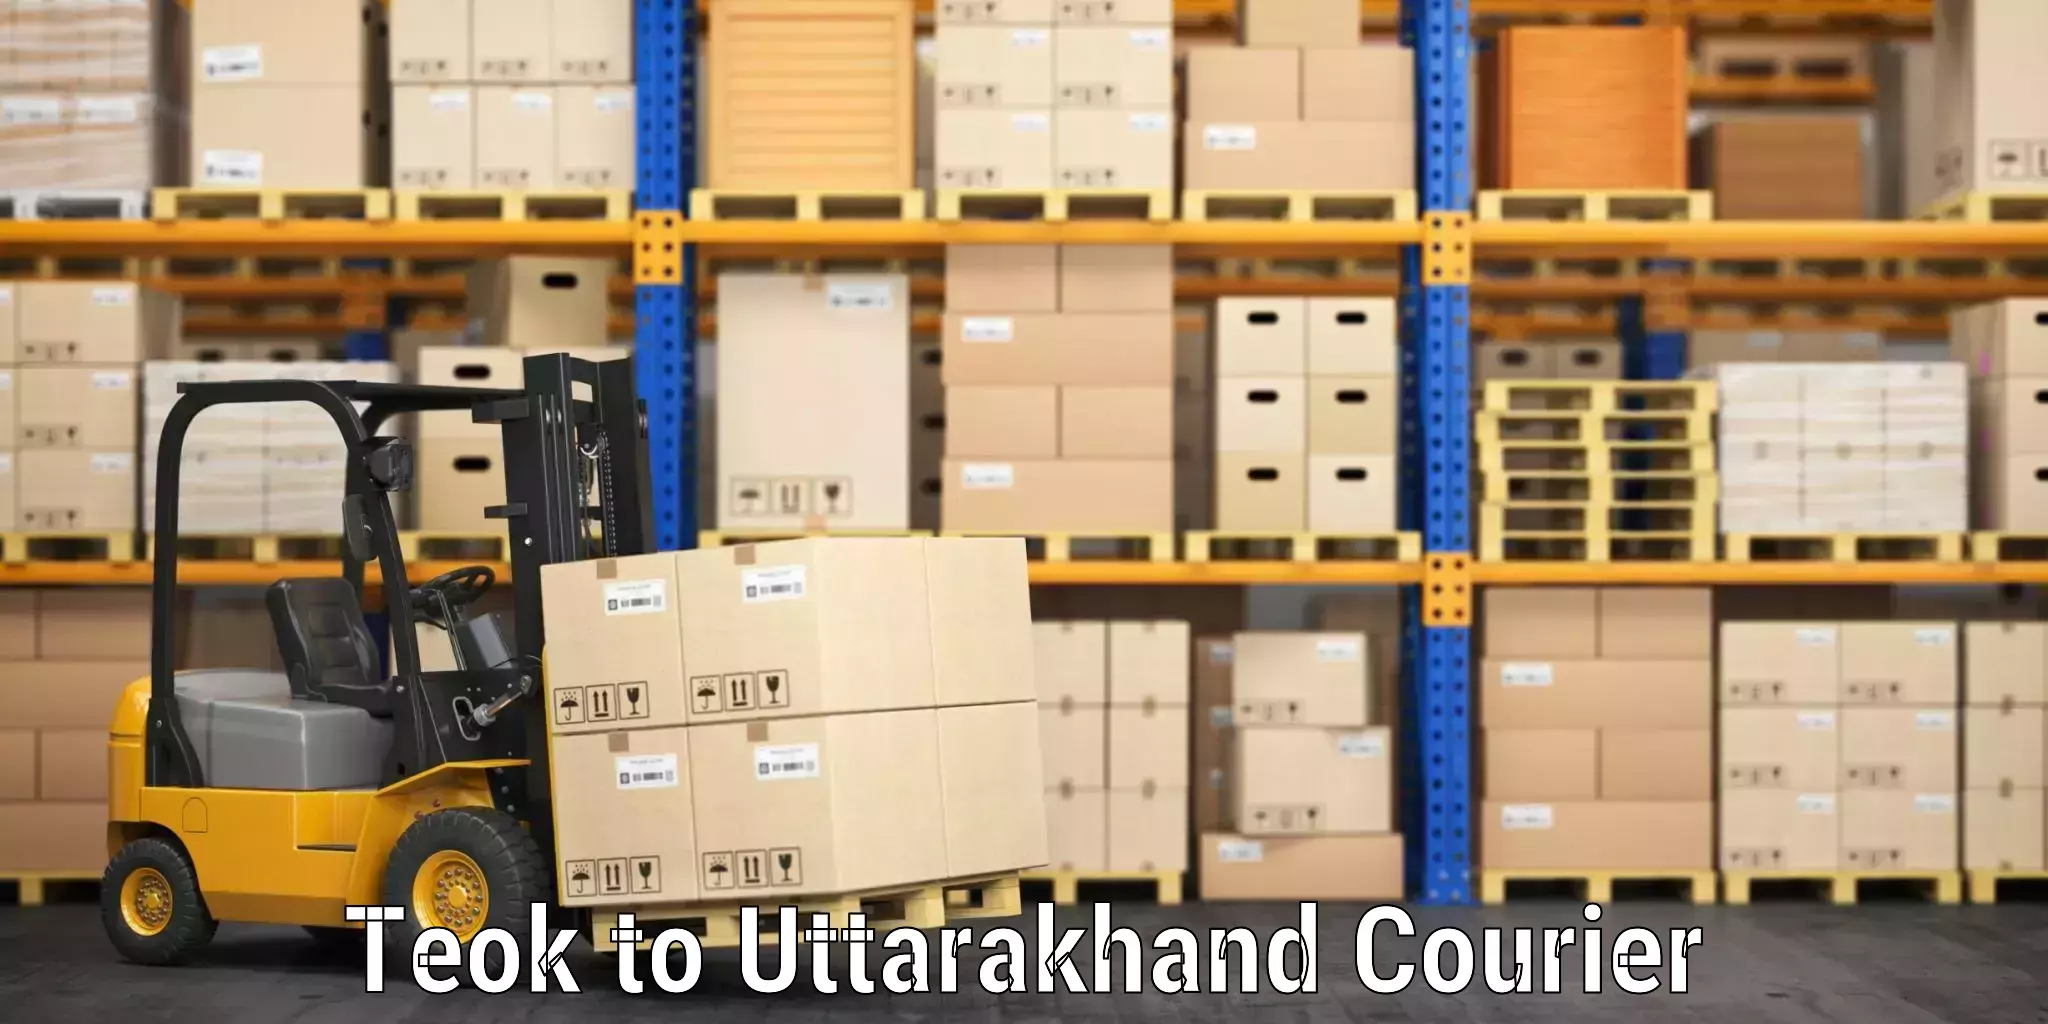 Baggage delivery technology Teok to Uttarakhand